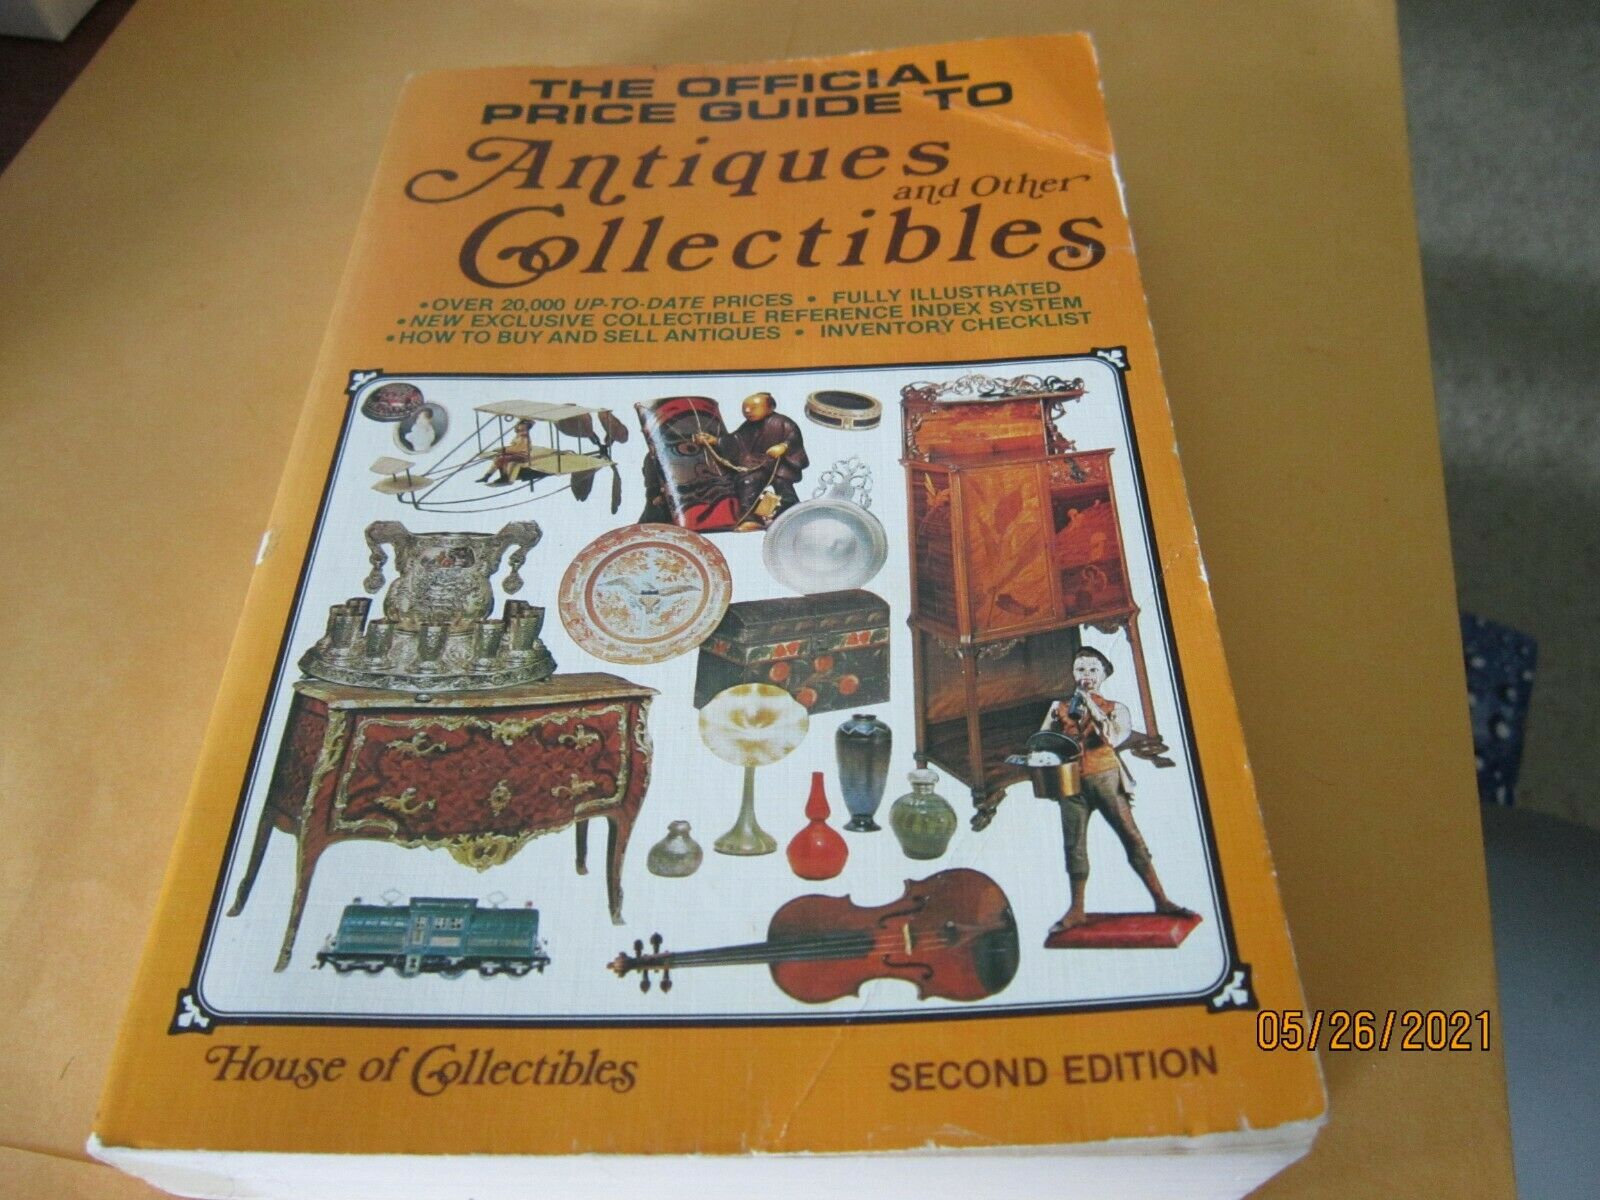 Offical Price Guide Antiques & Collectibles 2nd Ed Book Illustrated Mcfarland